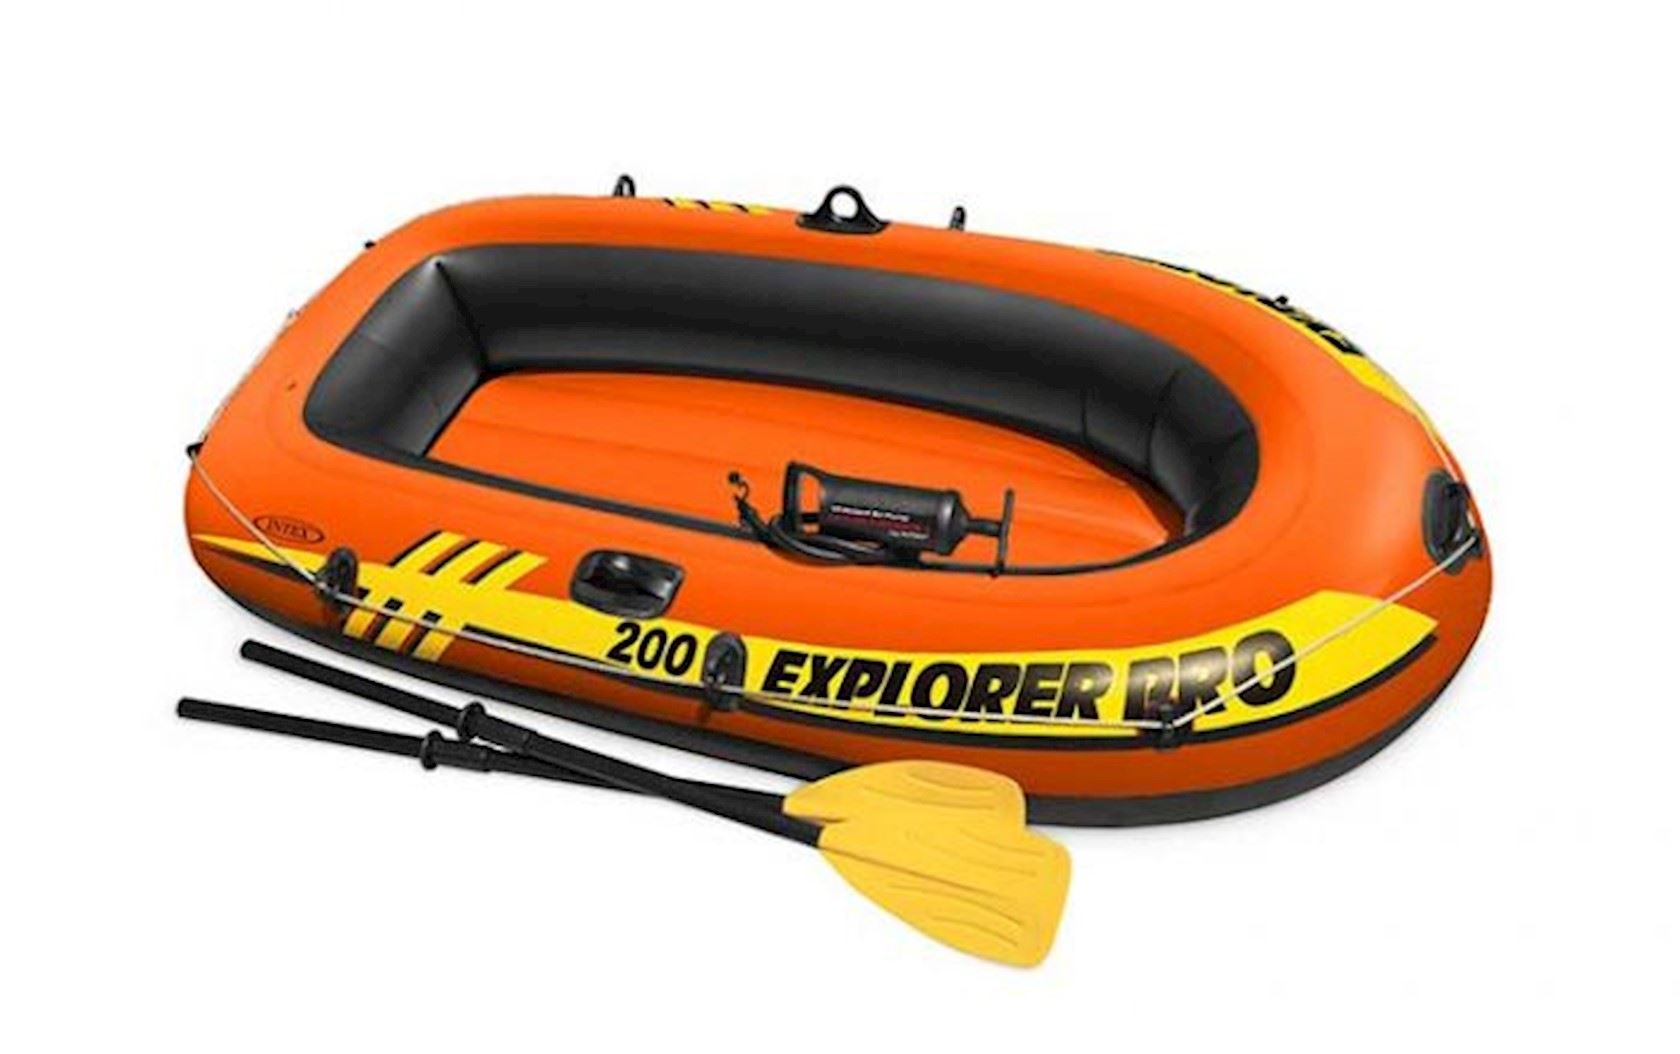 Intex inflatable boat 'Explorer Pro 200' - 2 people - accessories included  Includes 2 paddles, hand pump & repair patch